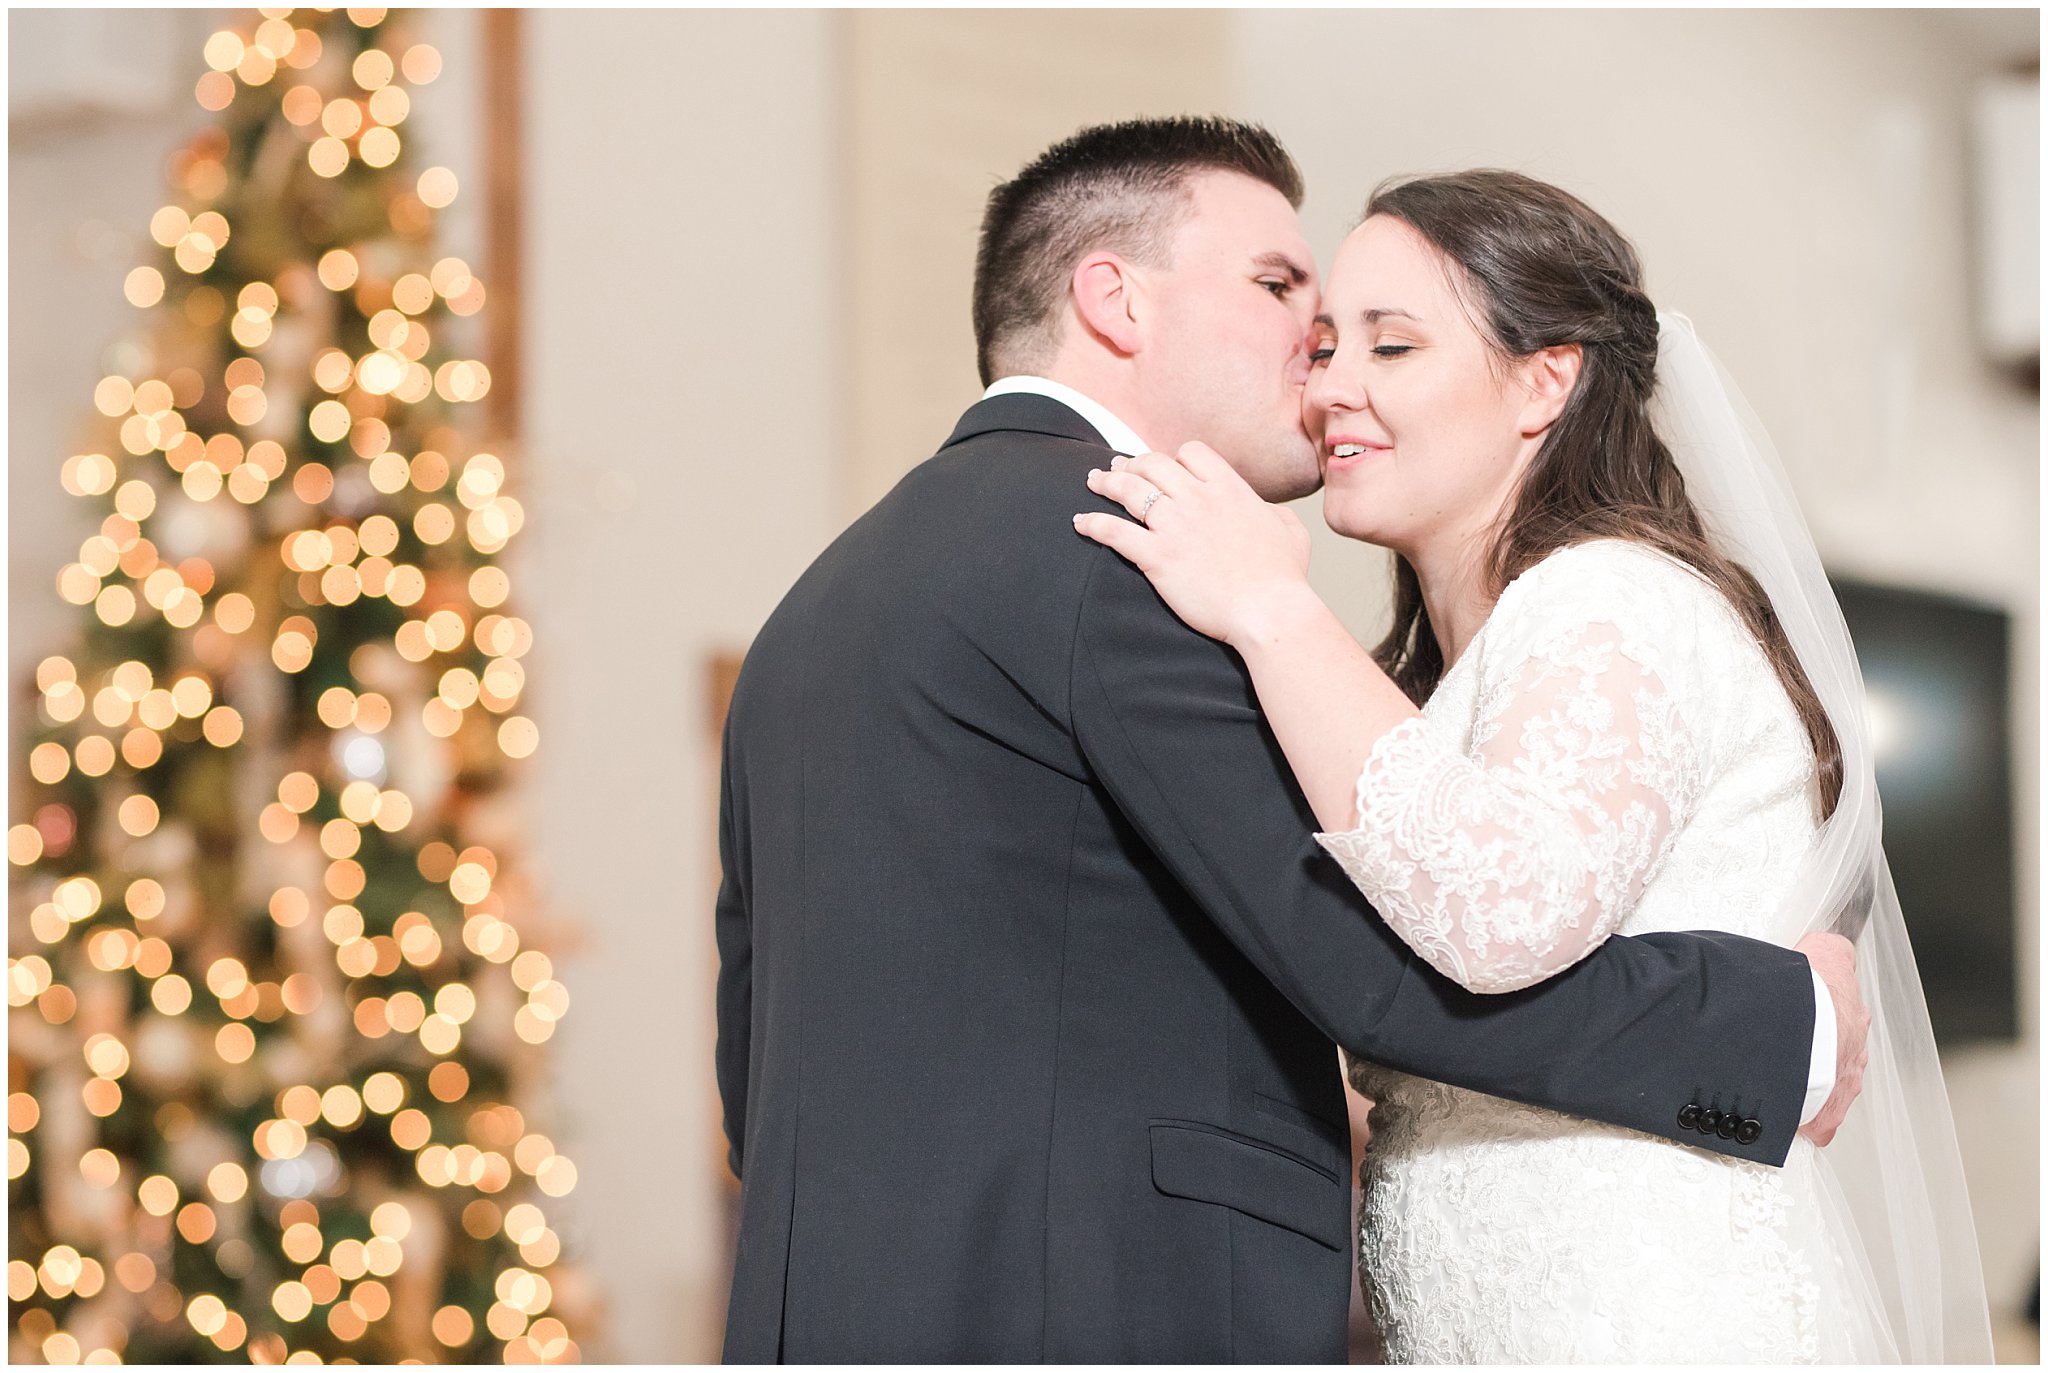 Bride and groom first dance at the Gathering Place at Gardner Village | Gardner Village Wedding | The Gathering Place | Jessie and Dallin Photography